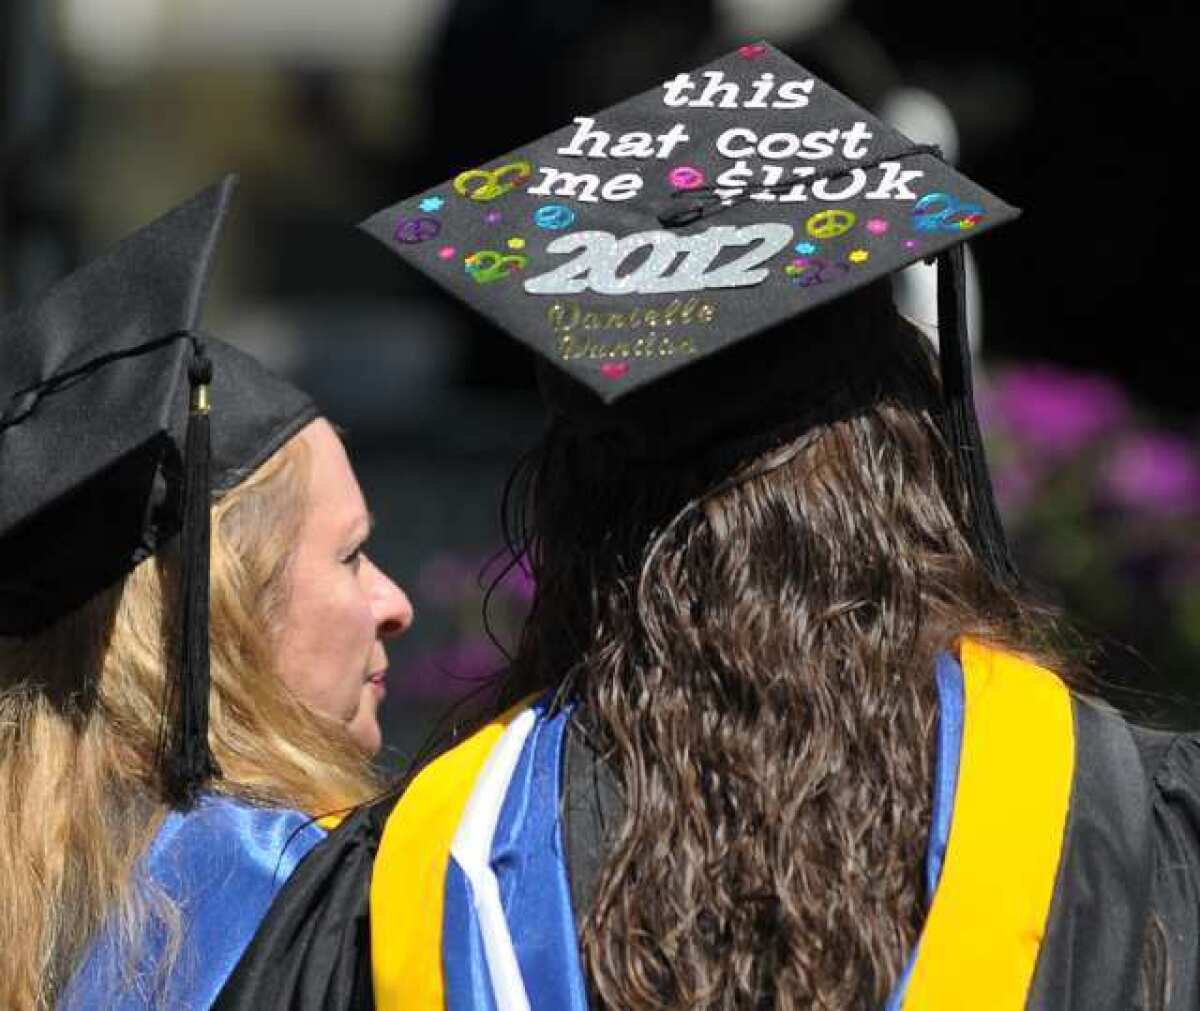 The graduation cap says it all at the Centenary College commencement ceremony last year in Hackettstown, N.J.